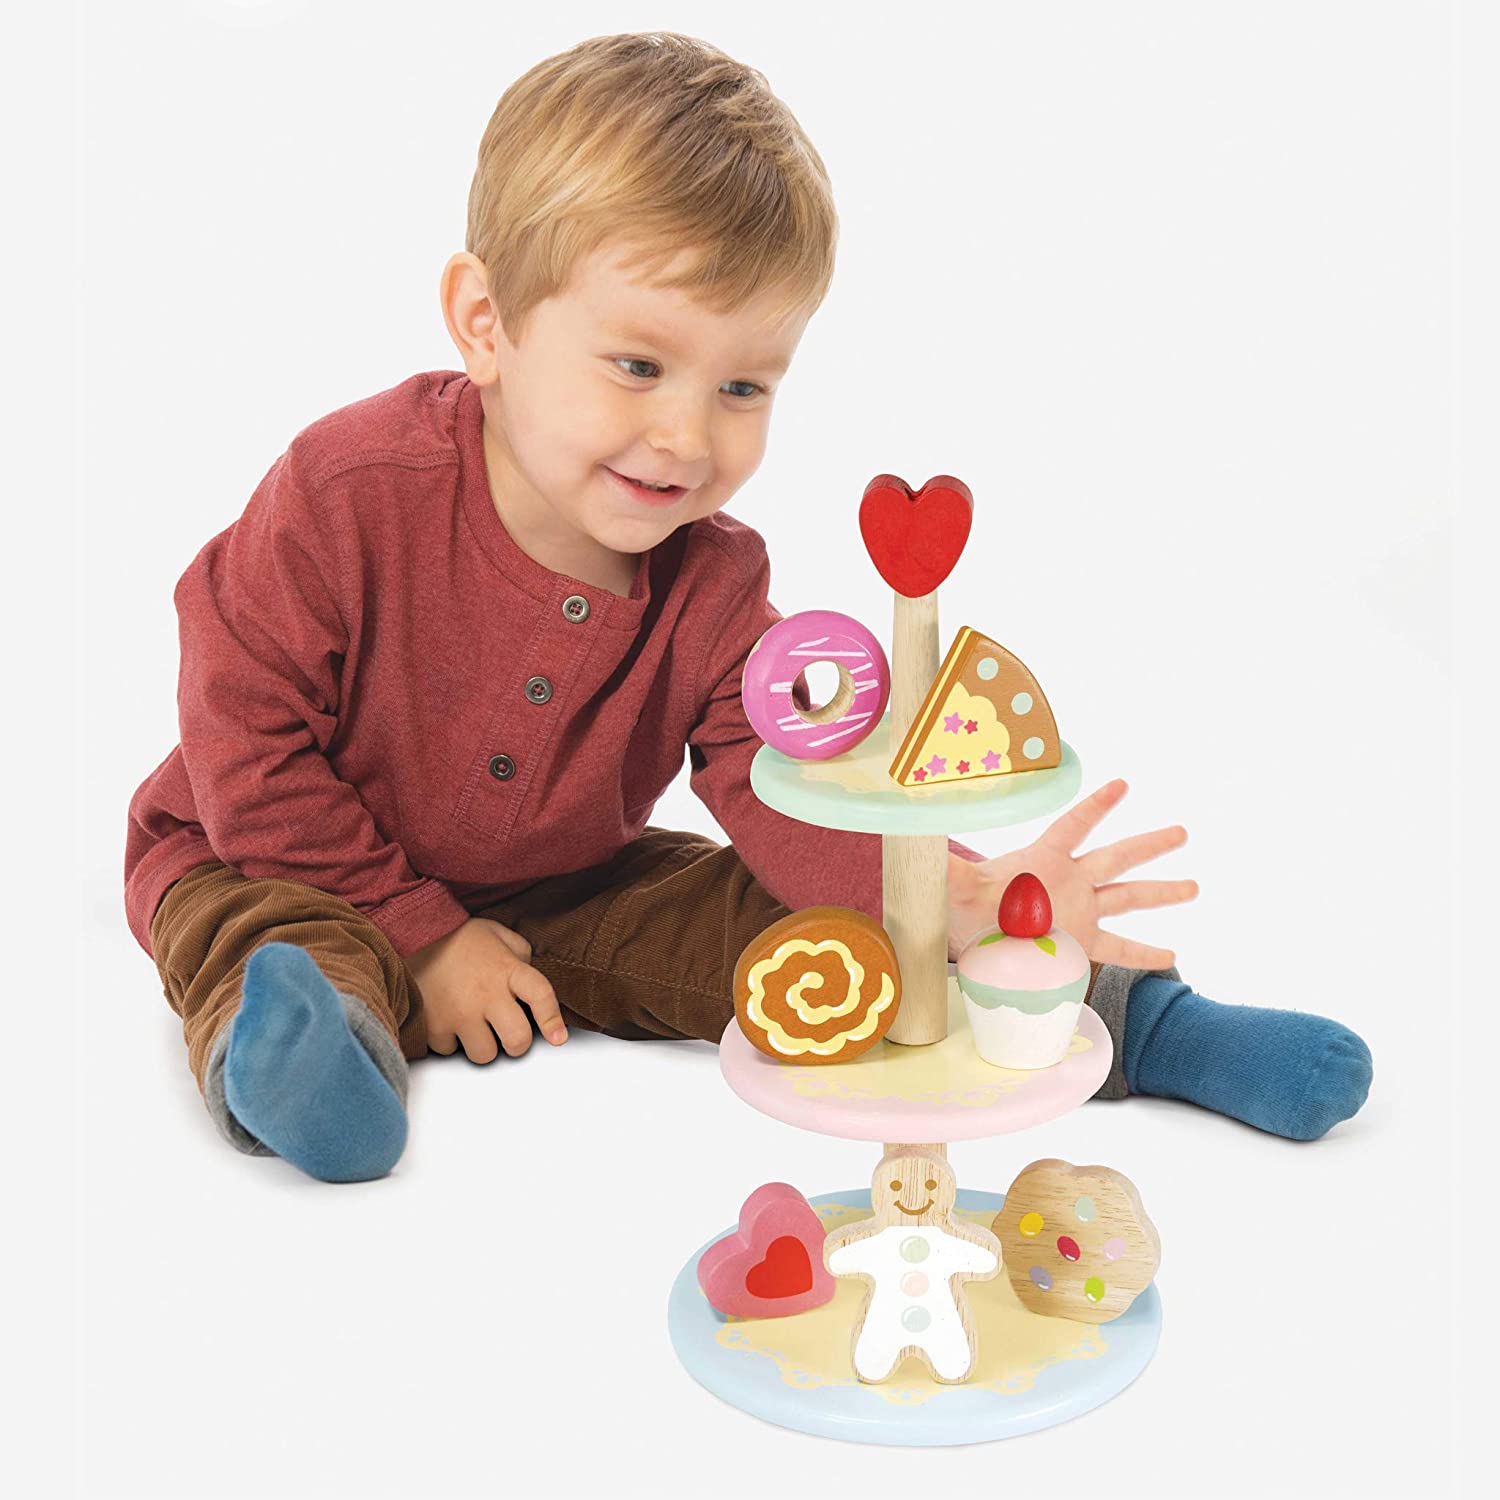 Tier Cake Stand Wooden Playset